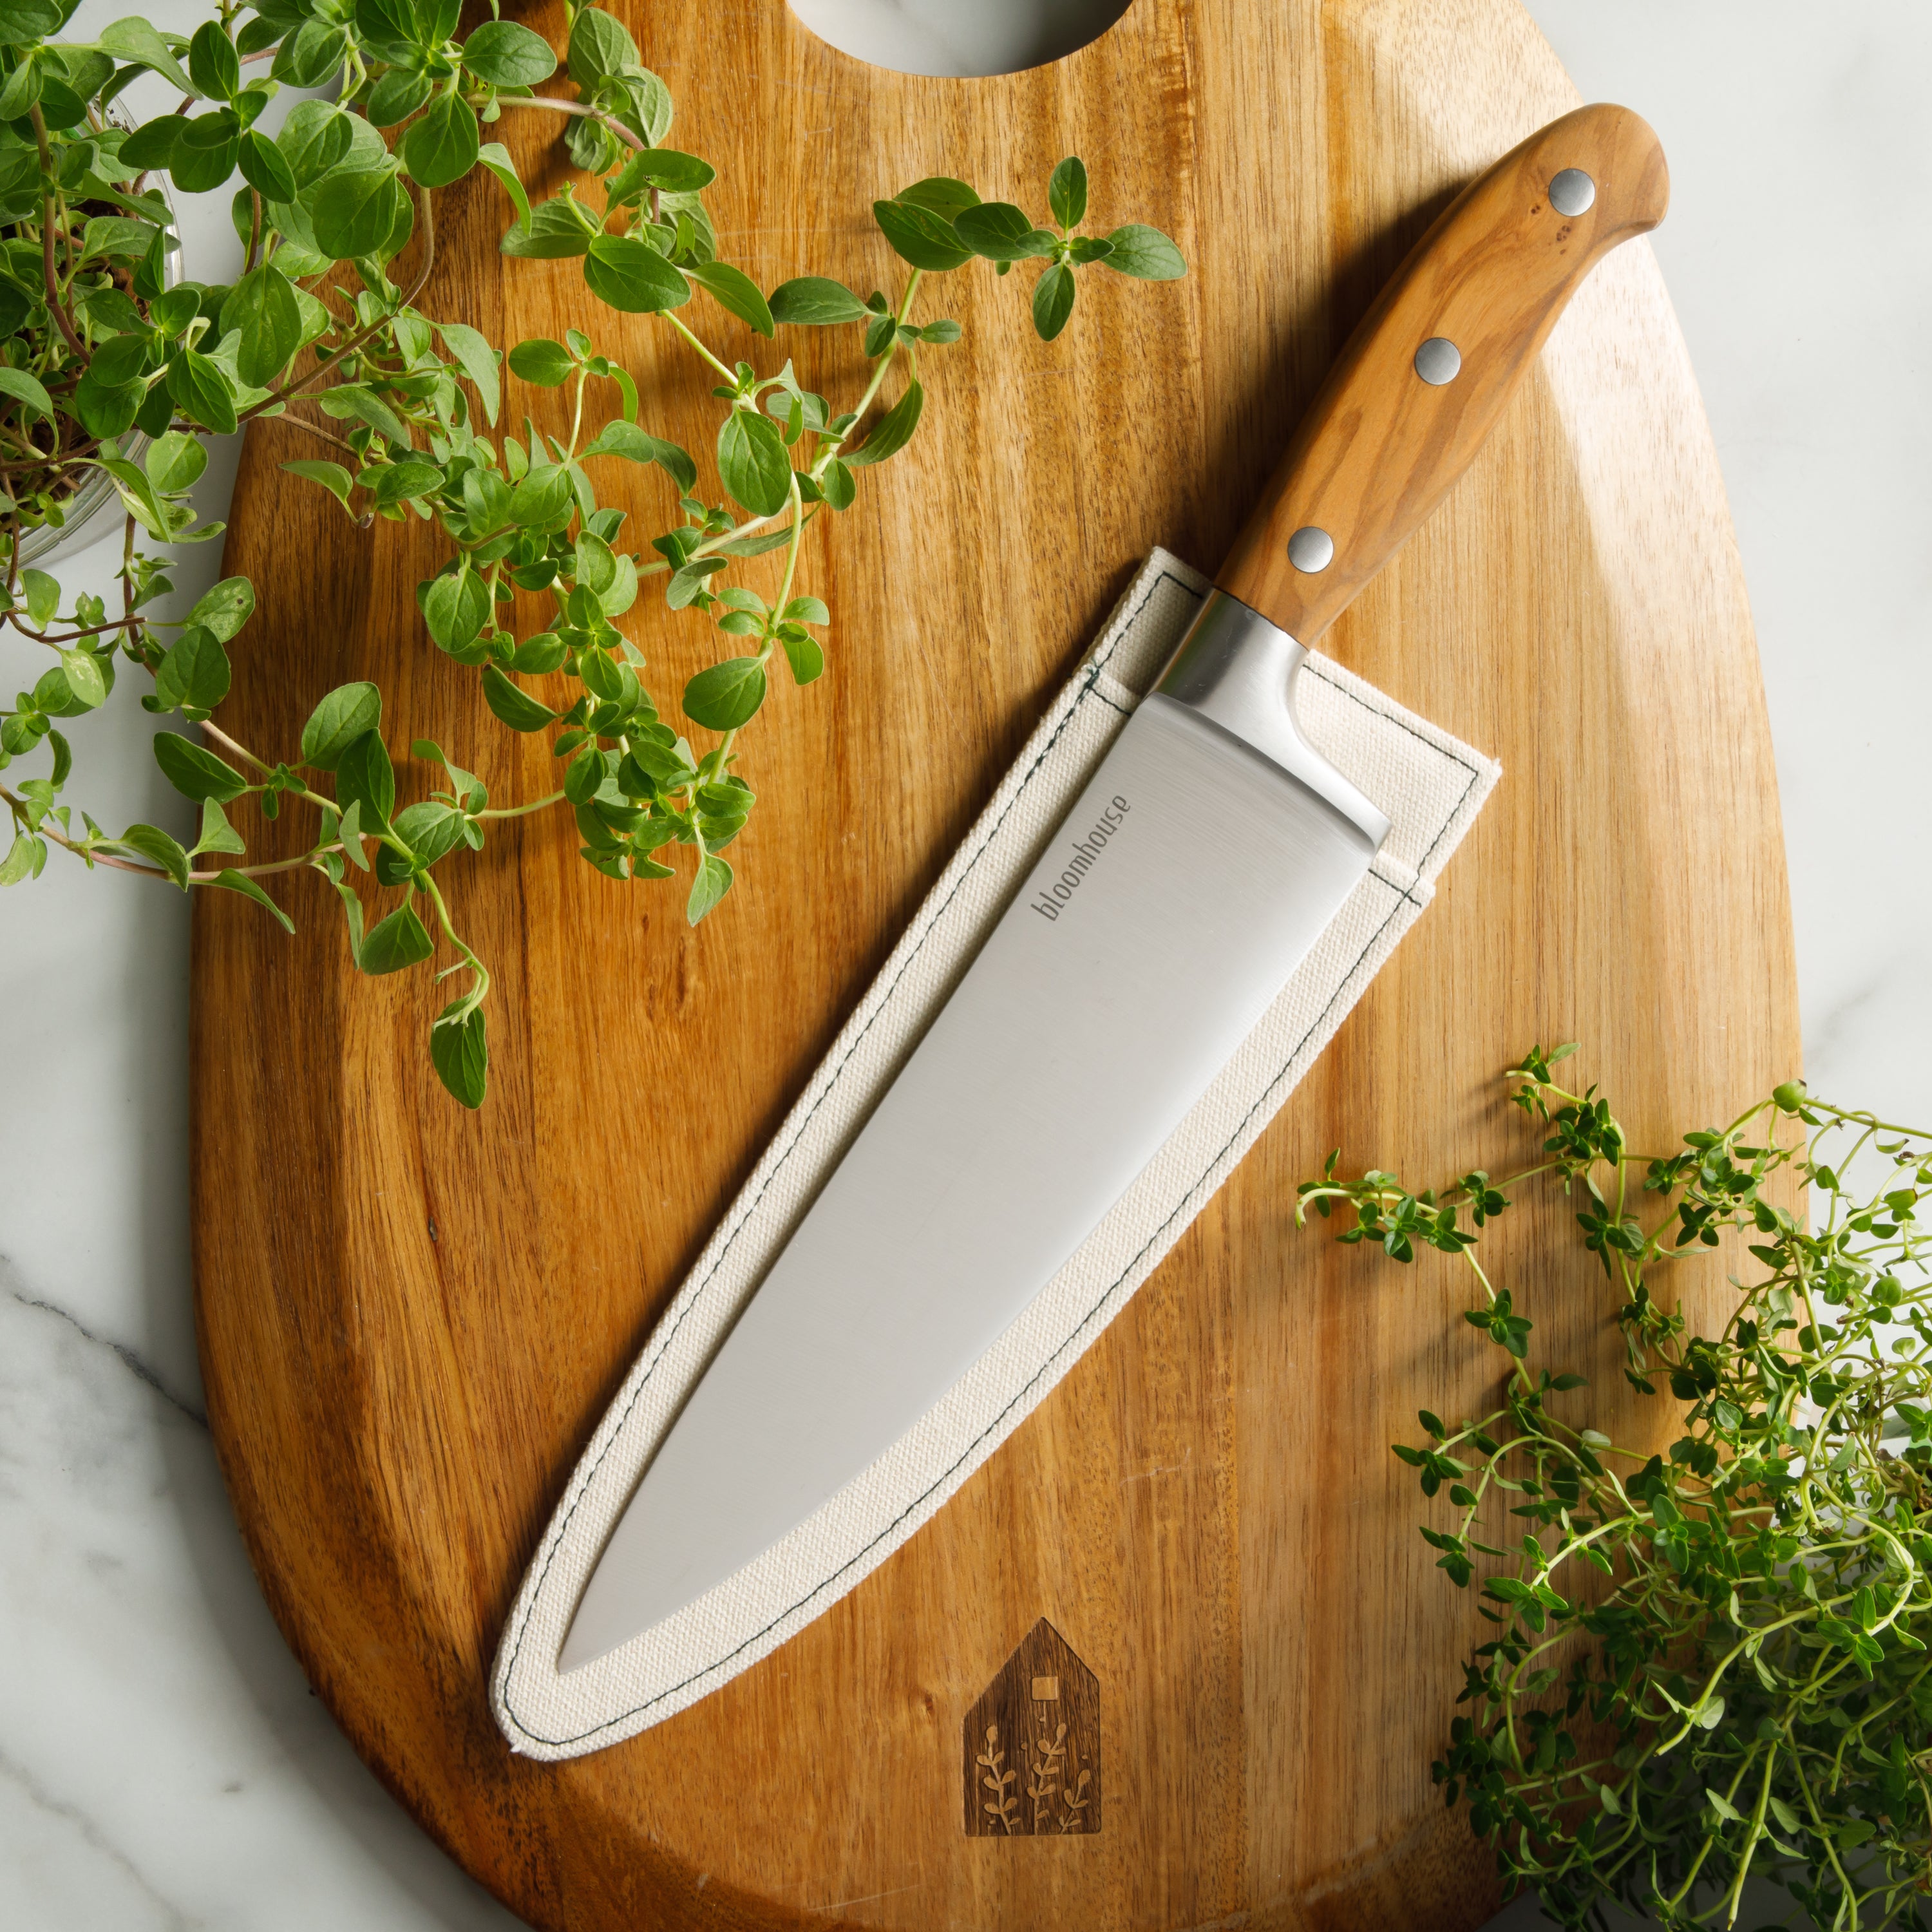 Babish High-Carbon 1.4116 German Steel Cutlery Knives, 8 Chef